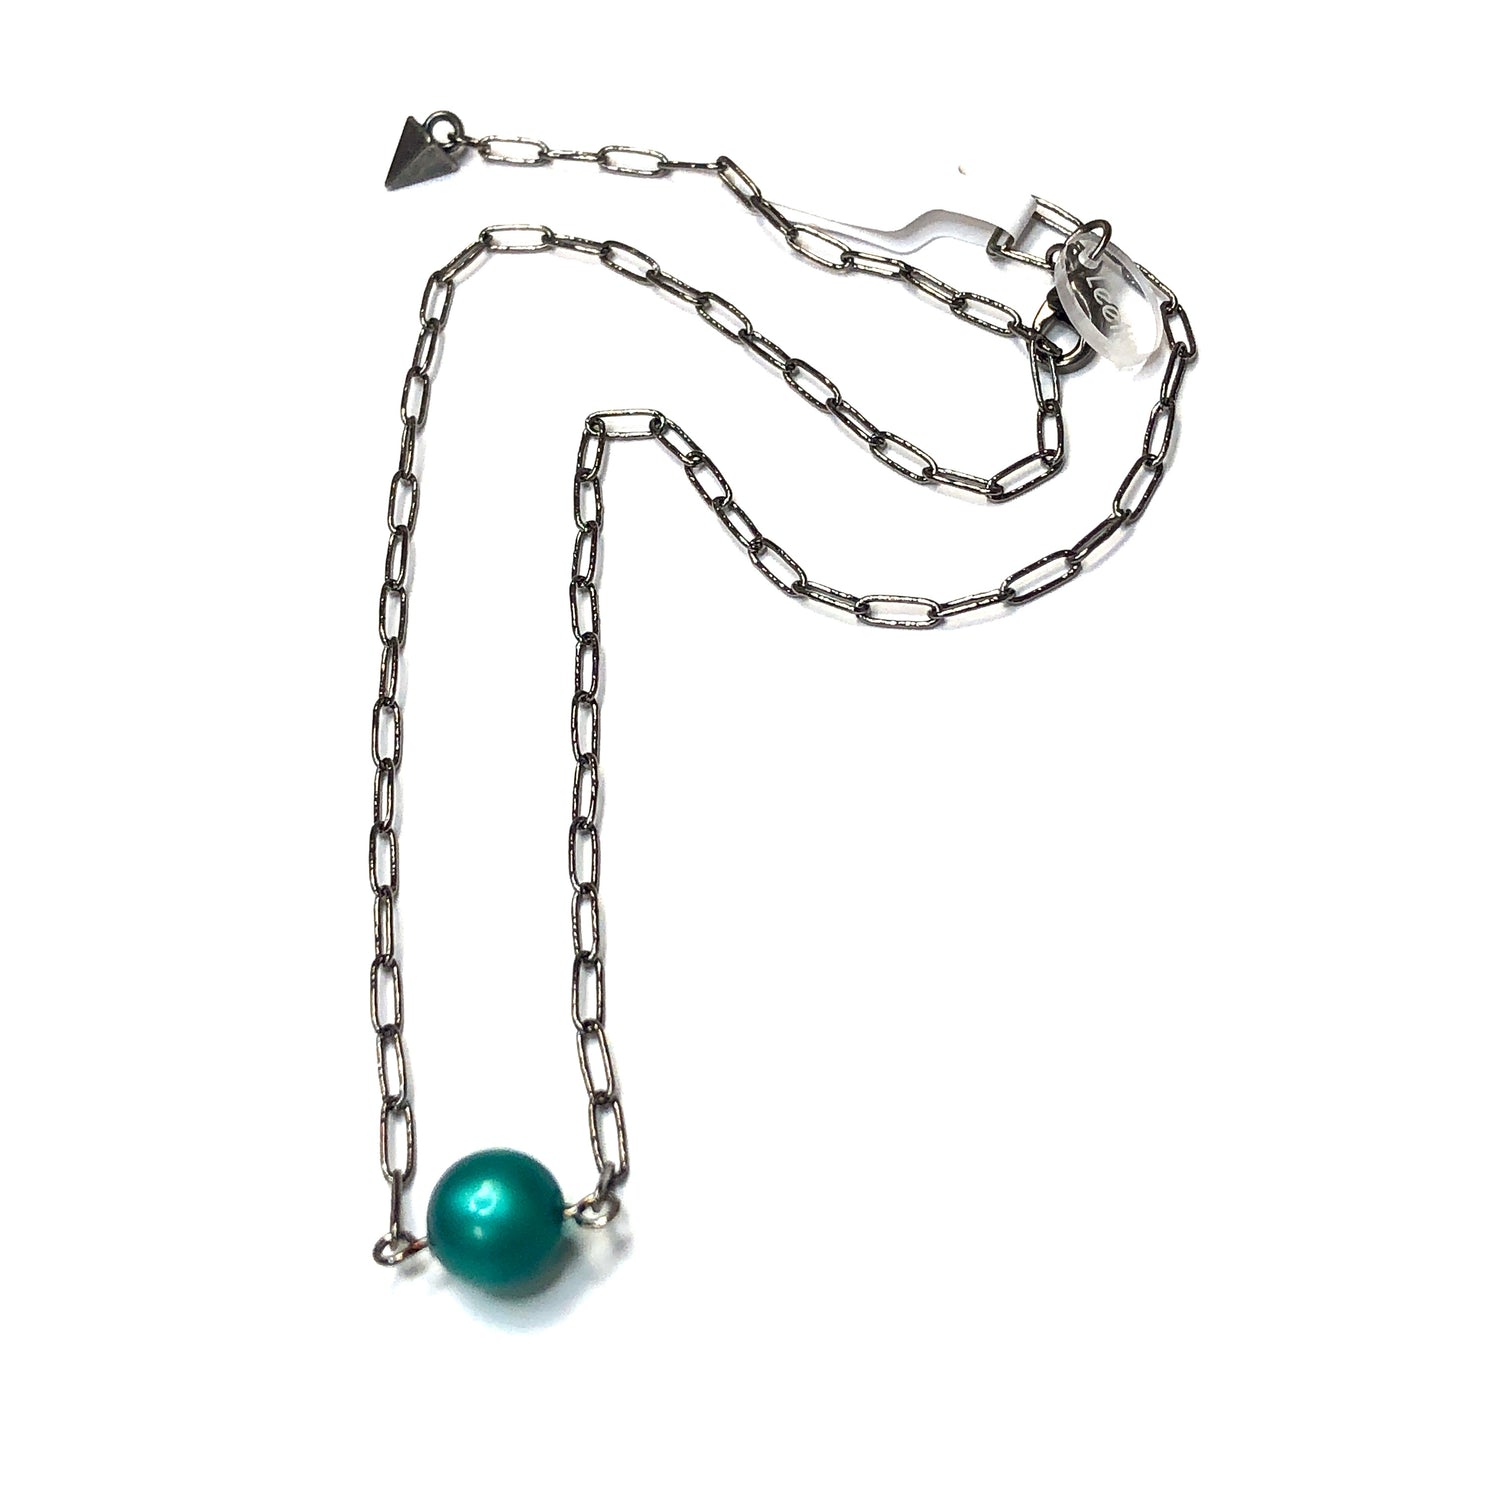 Emerald Green Moonglow Bauble Paperclip Necklace